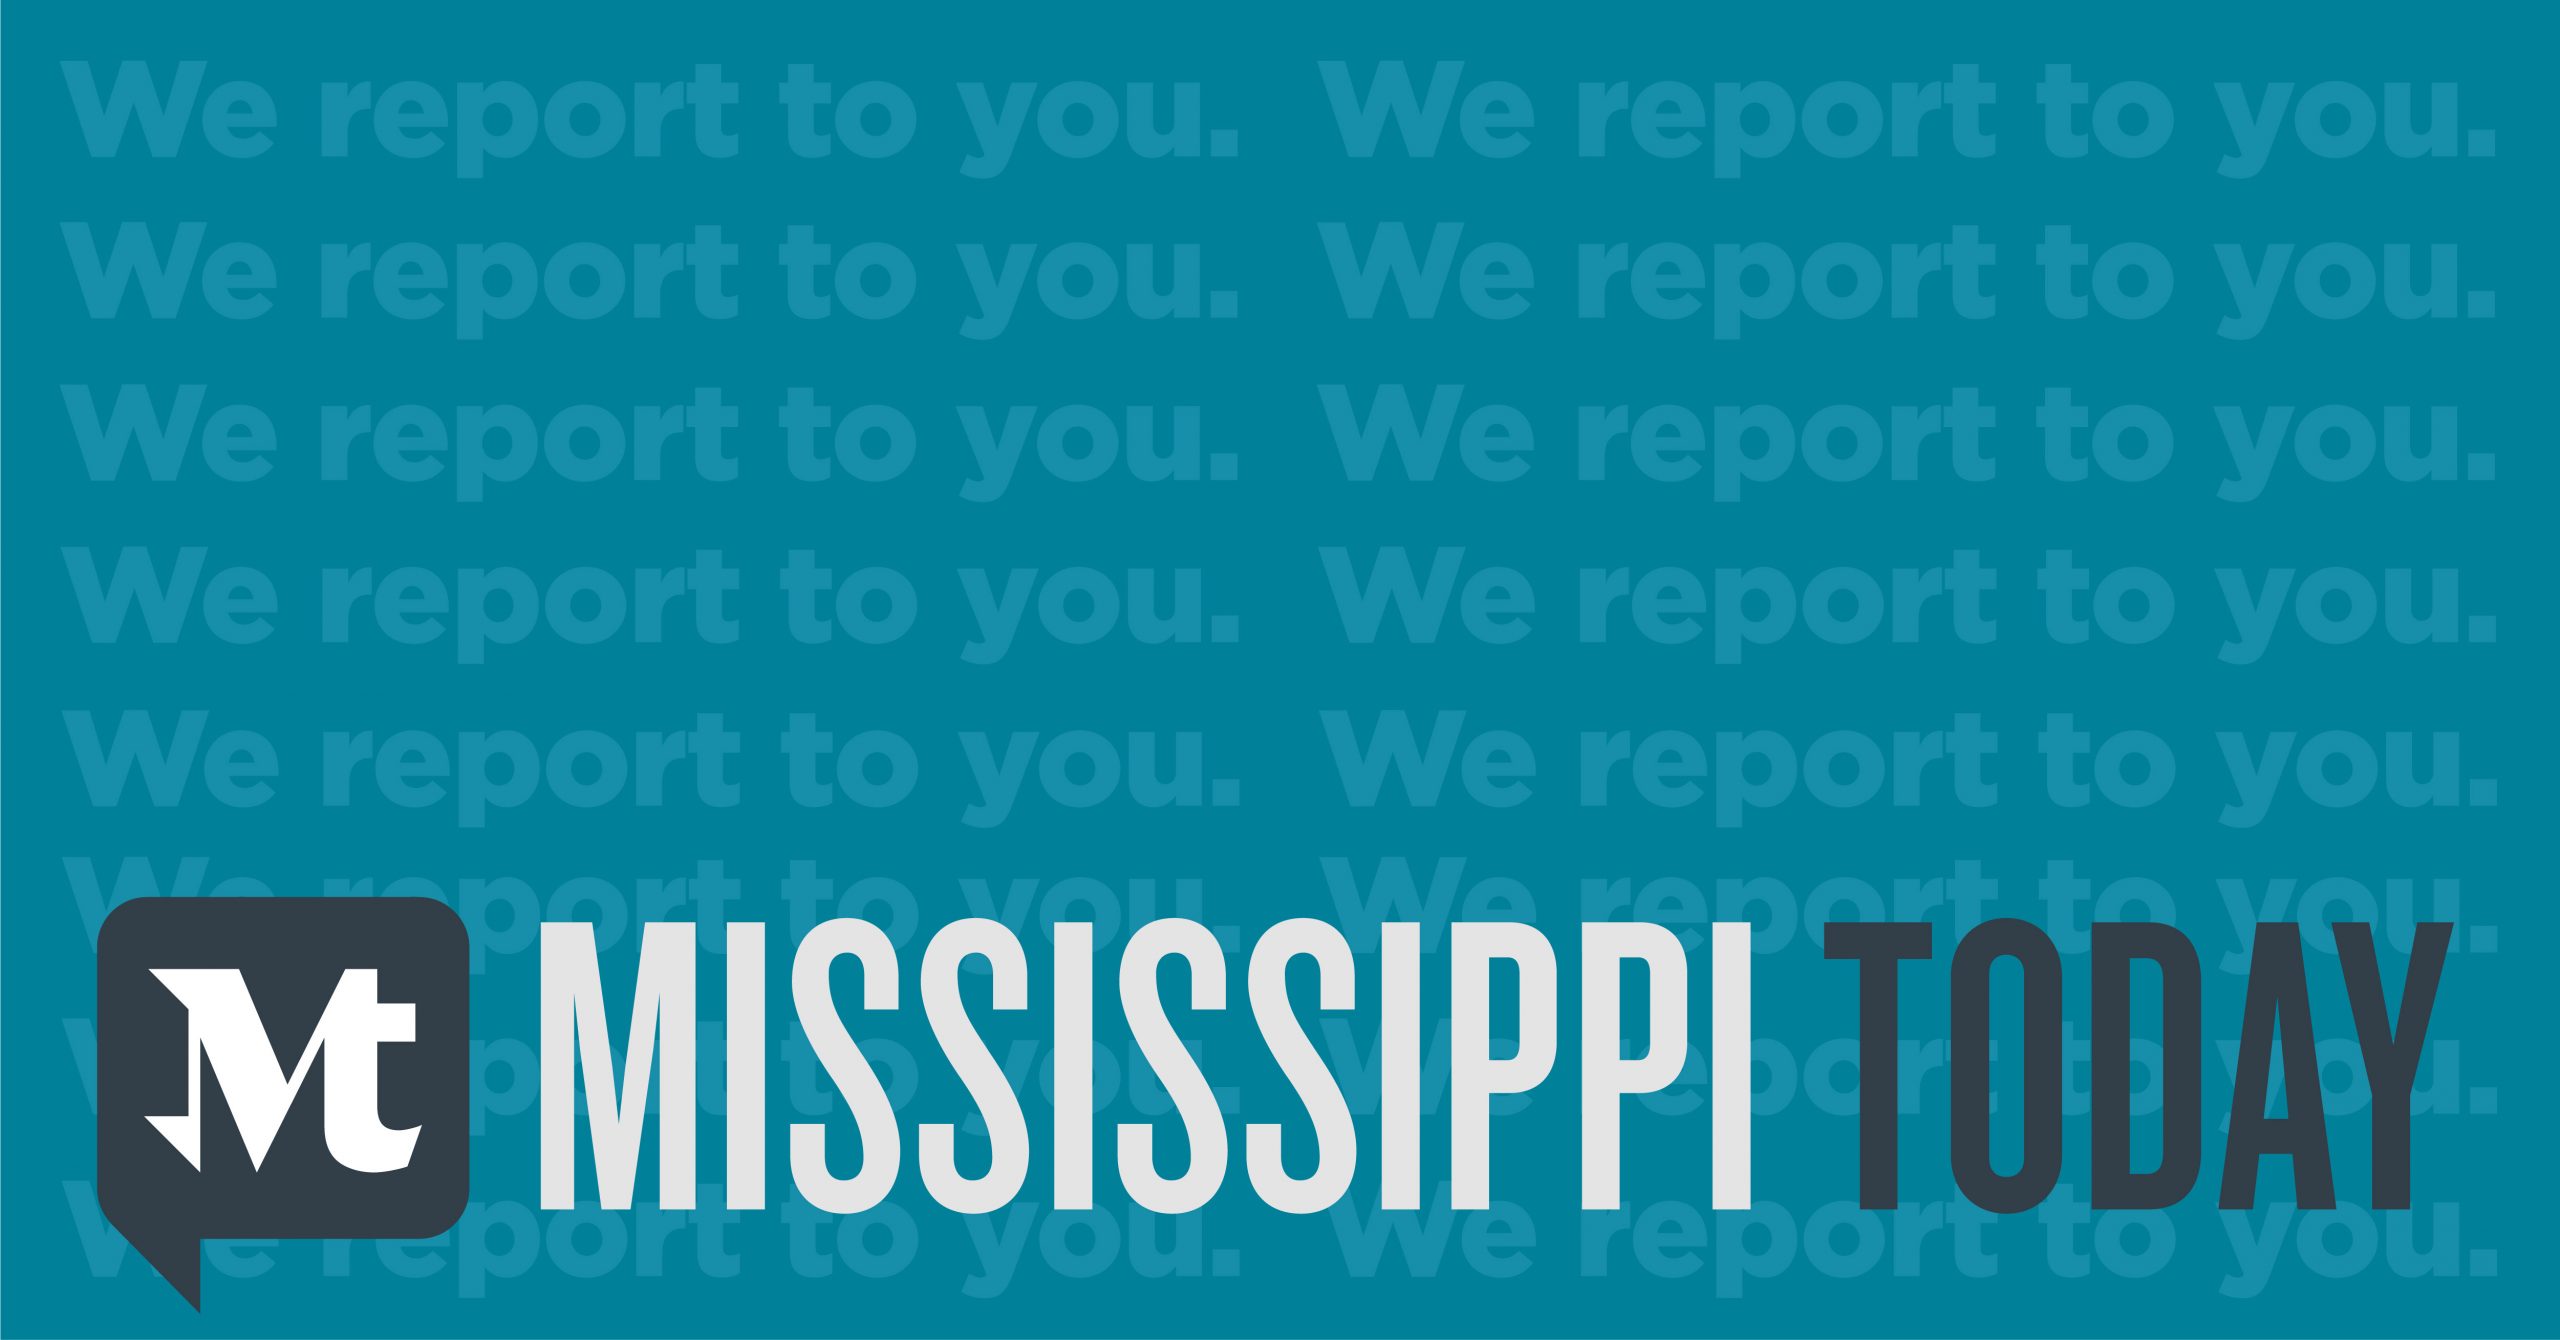 Mississippi Today (Social Sharing Image)